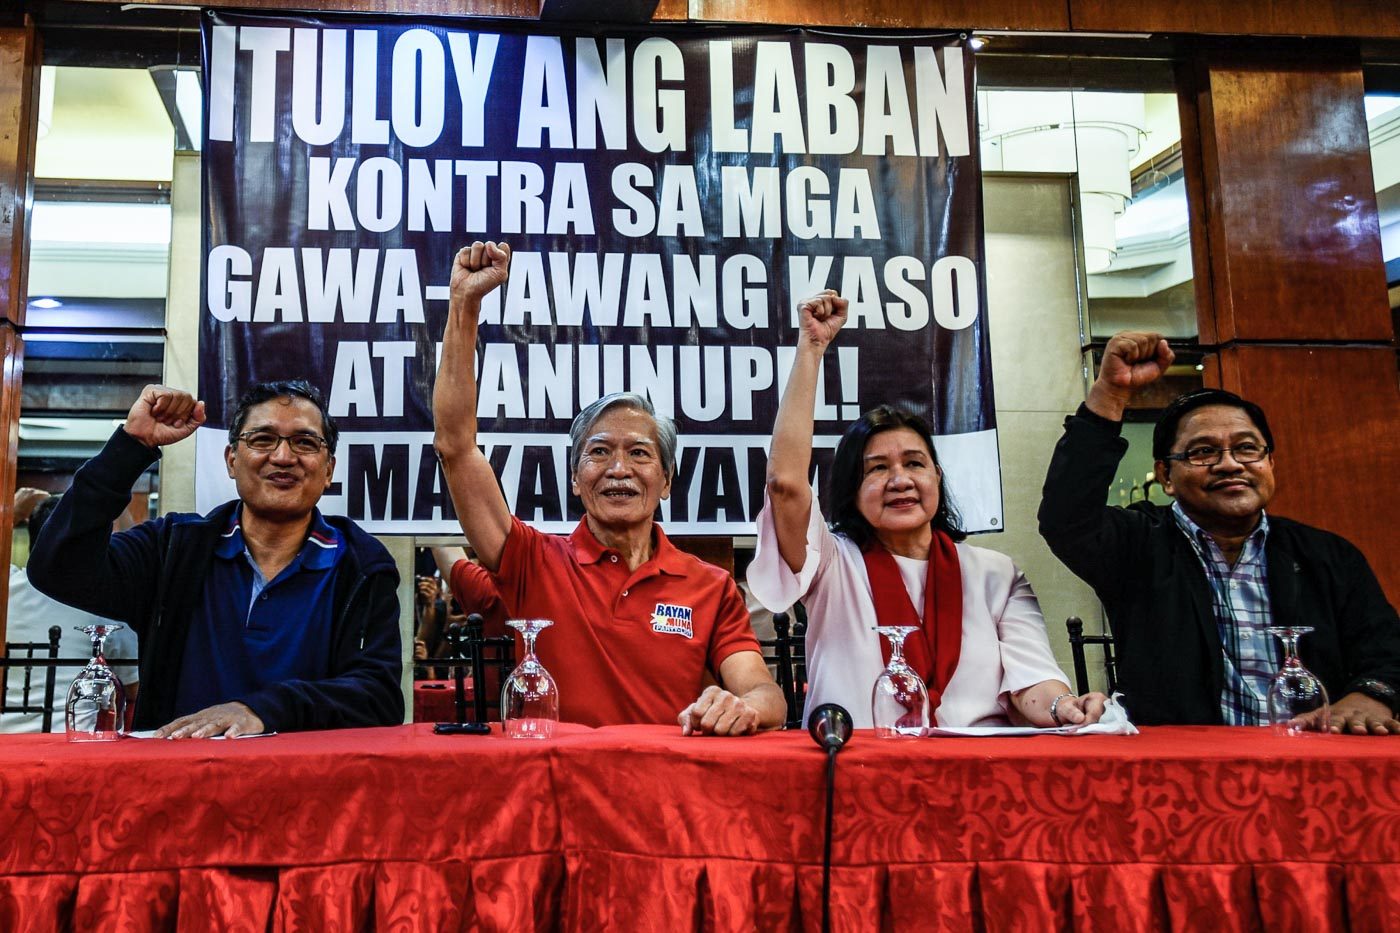 OUT. Former Lawmakers (from left) Teodoro Casino, Satur Ocampo, incumbent Anti-Poverty Secretary Liza Maza and Former Agrarian Reform secretary Rafael Mariano, raise their clenched fist during a press conference in Quezon City on August 14, 2018 after a Nueva Ecija court clears them from murder charges. Photo by Maria Tan/Rappler  